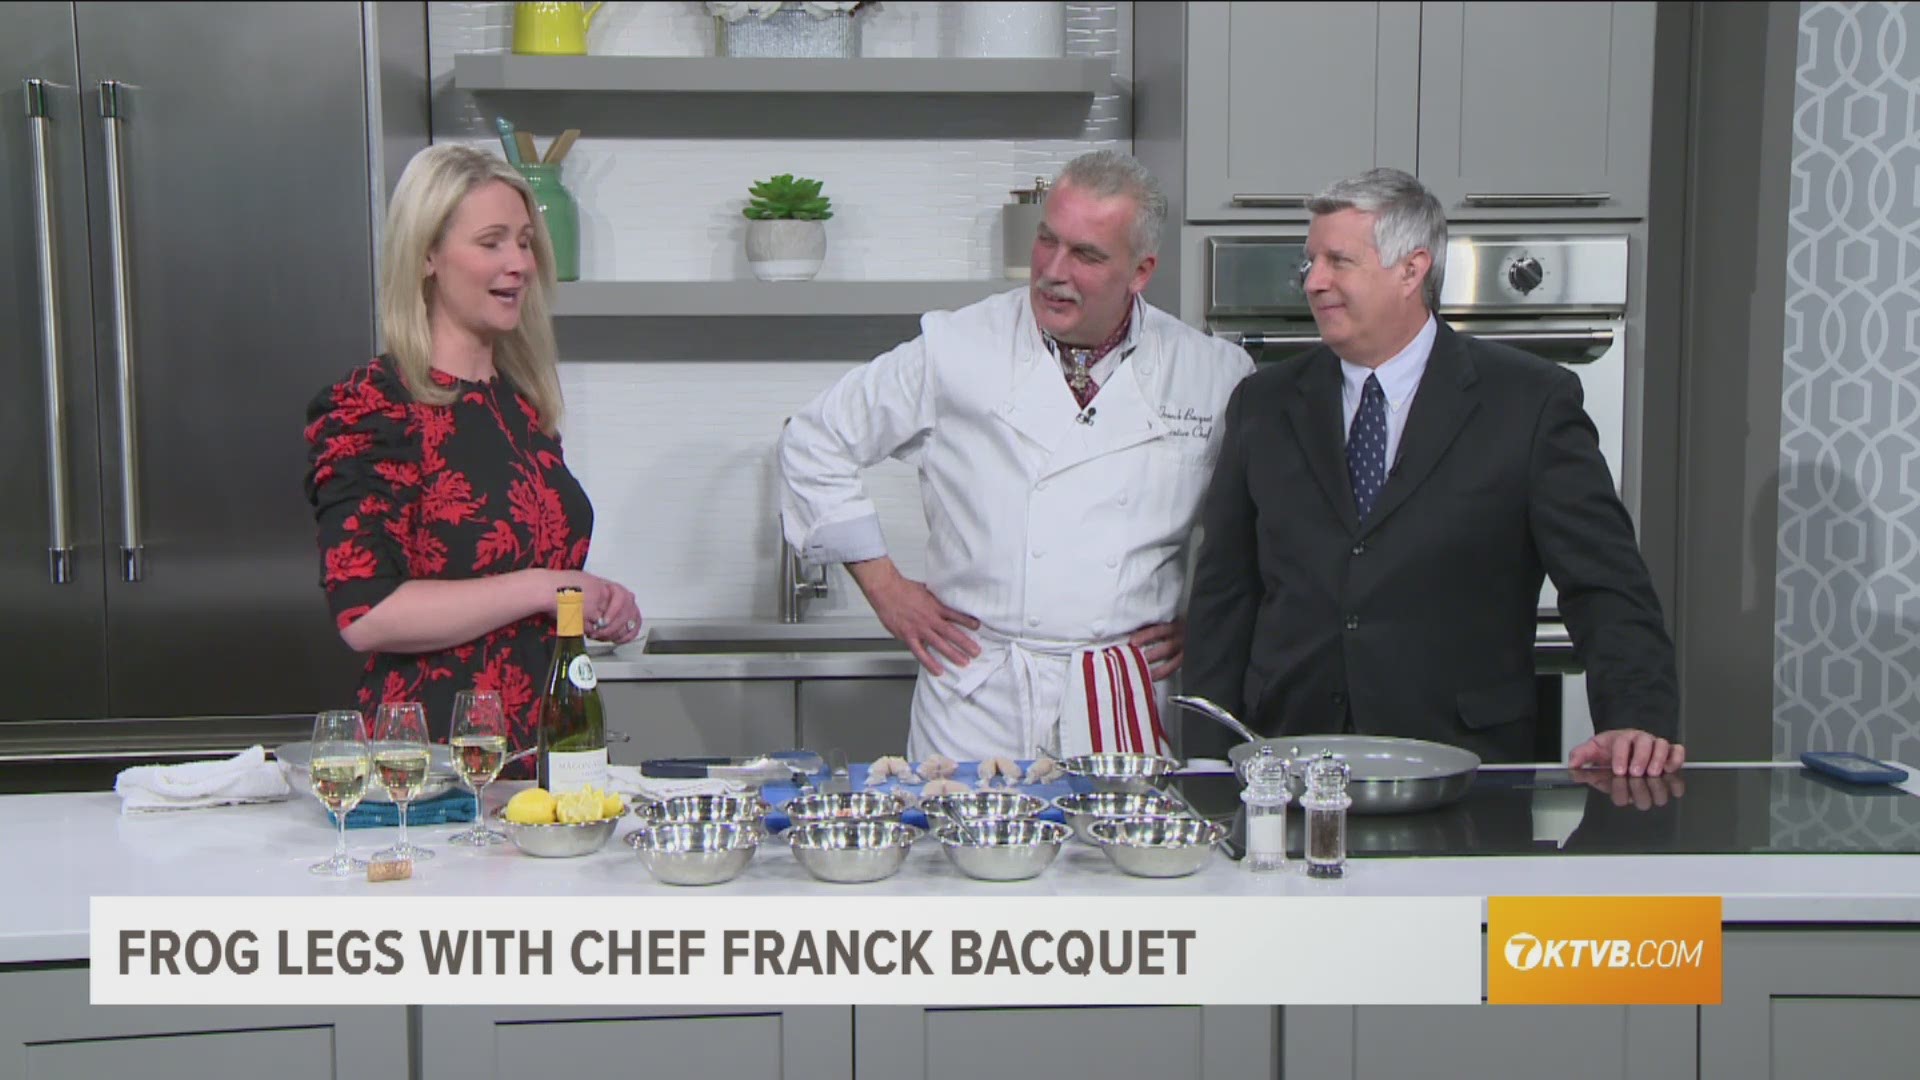 Chef Franck Bacquet stops by the KTVB Kitchen to show us how to prepare these delicious frog legs.